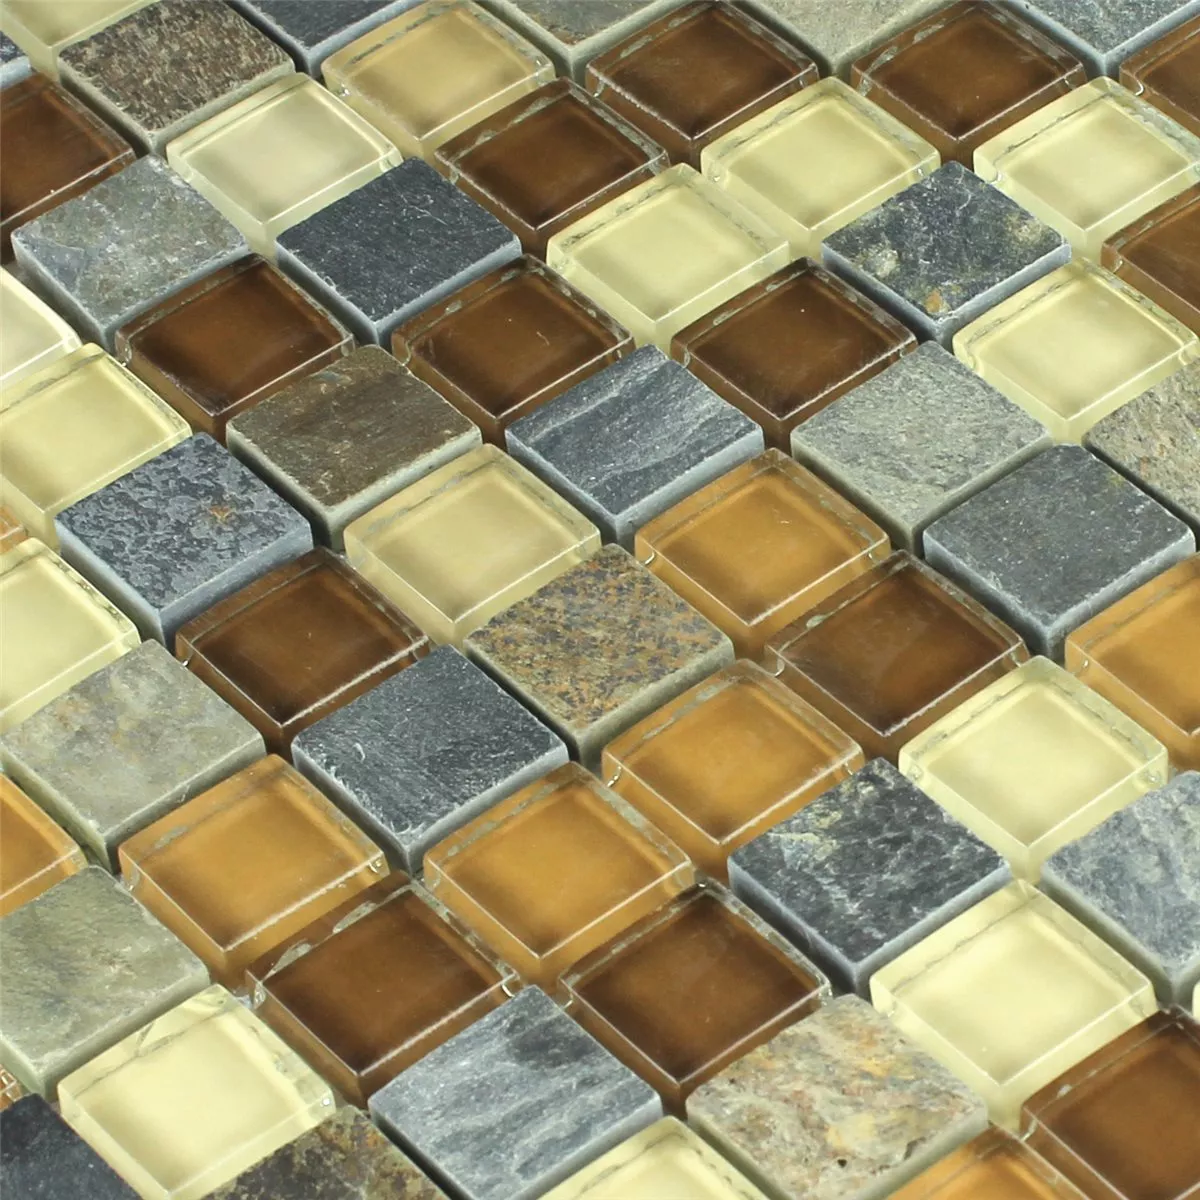 Mosaic Tiles Glass Natural Stone Beige